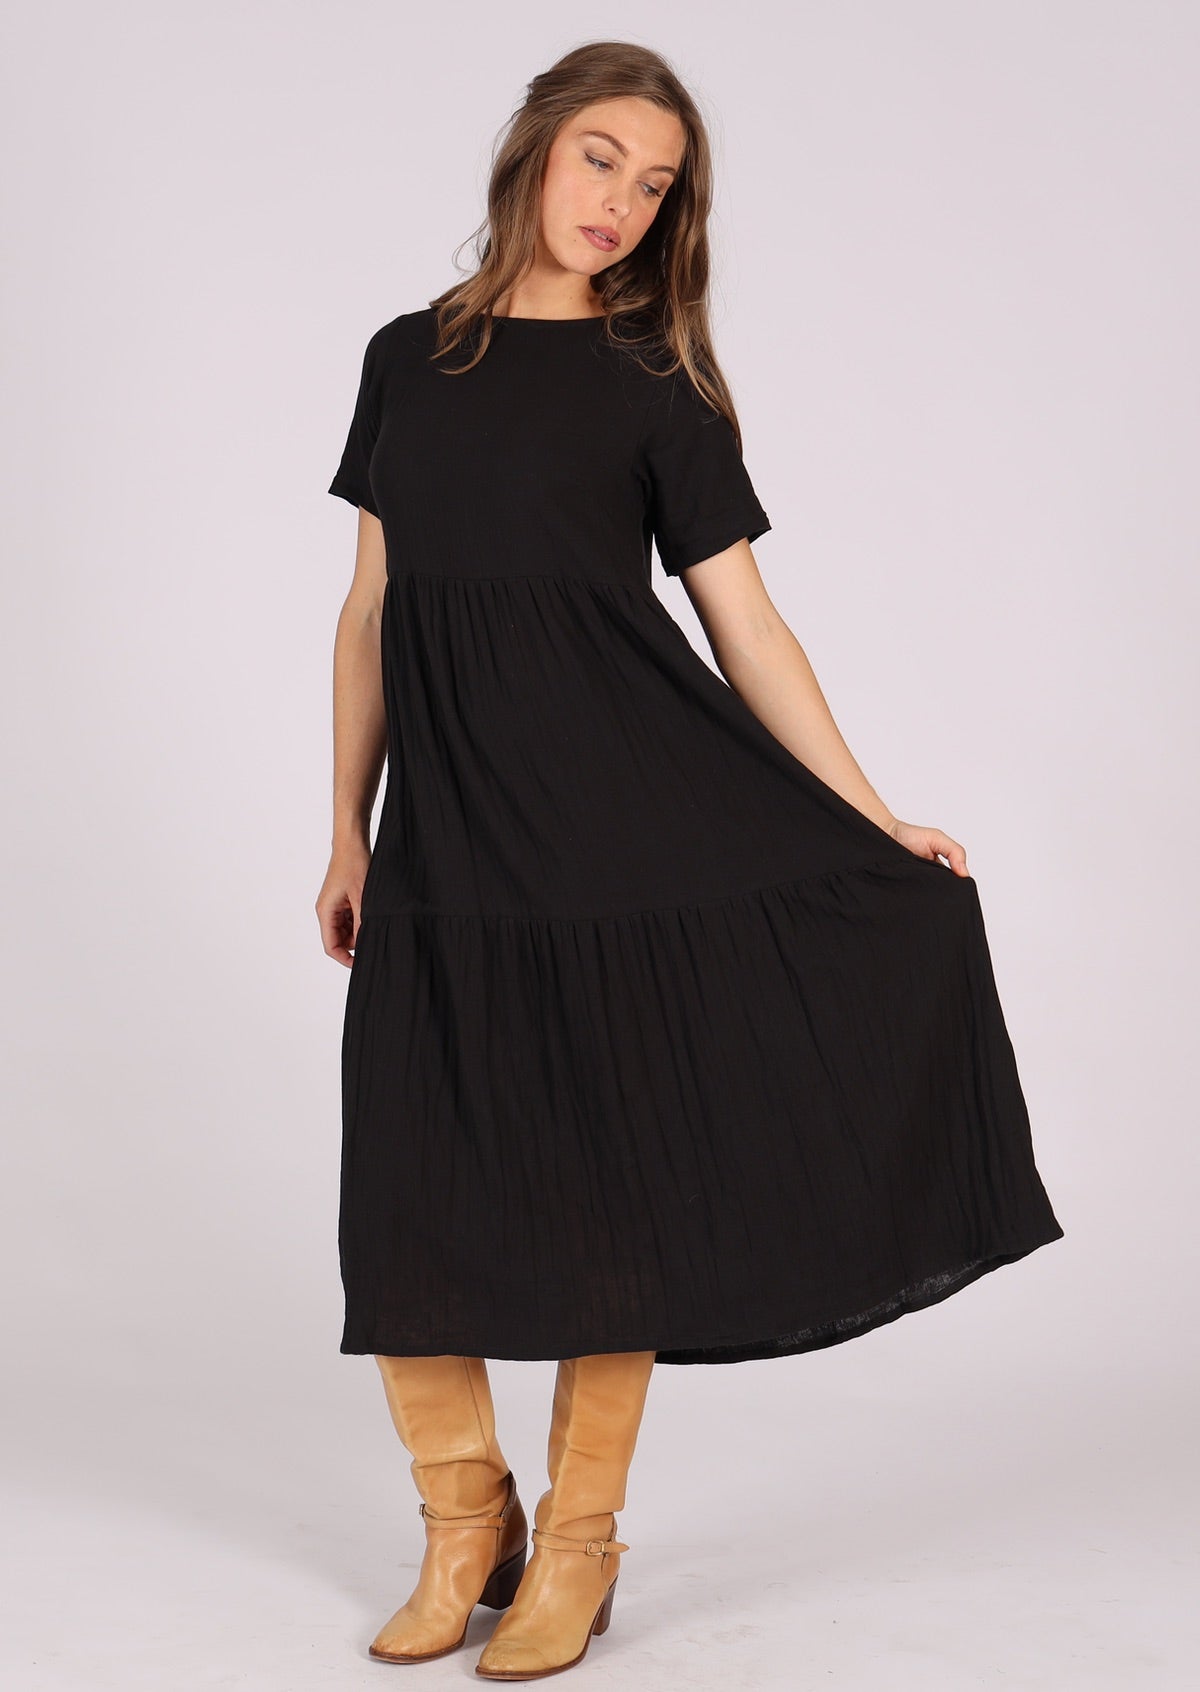 Relaxed fit black double cotton dress with 3 tiers